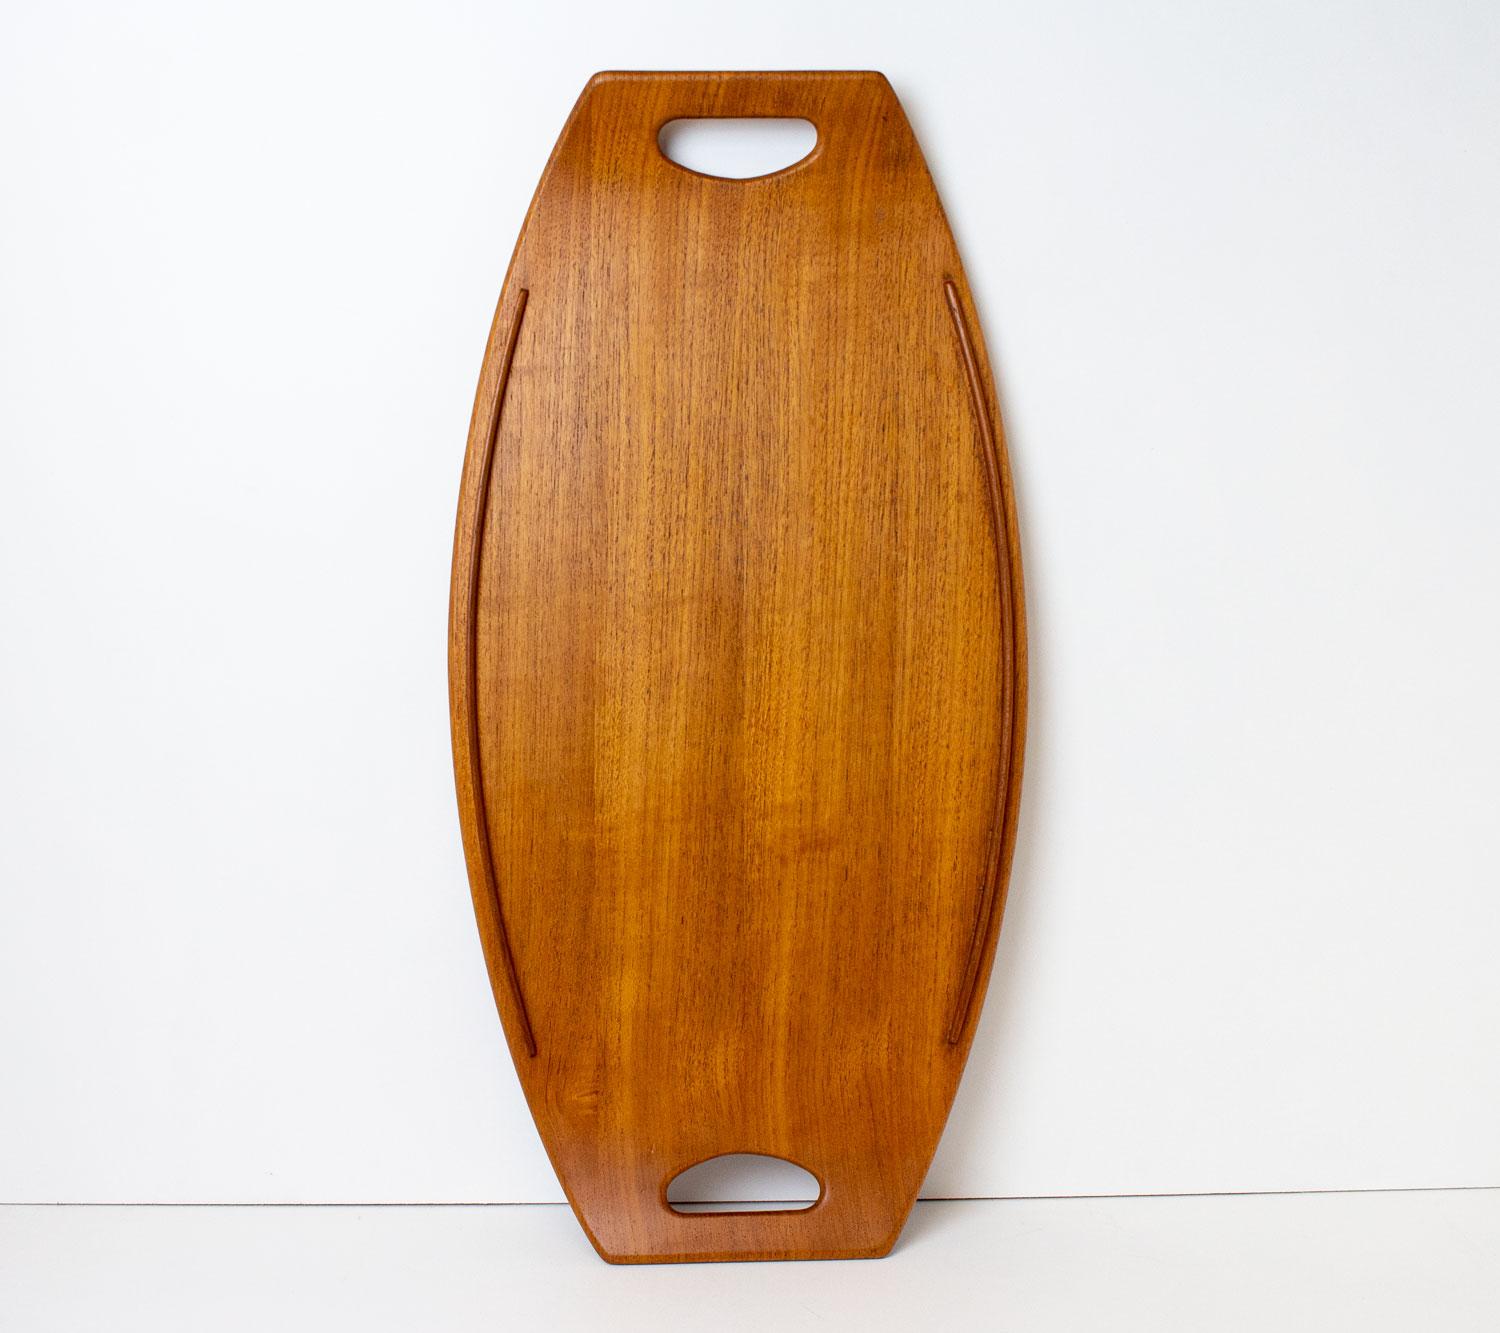 Danish Teak Tray by Jens Quistgaard for Dansk, 1950s In Good Condition For Sale In Southampton, GB